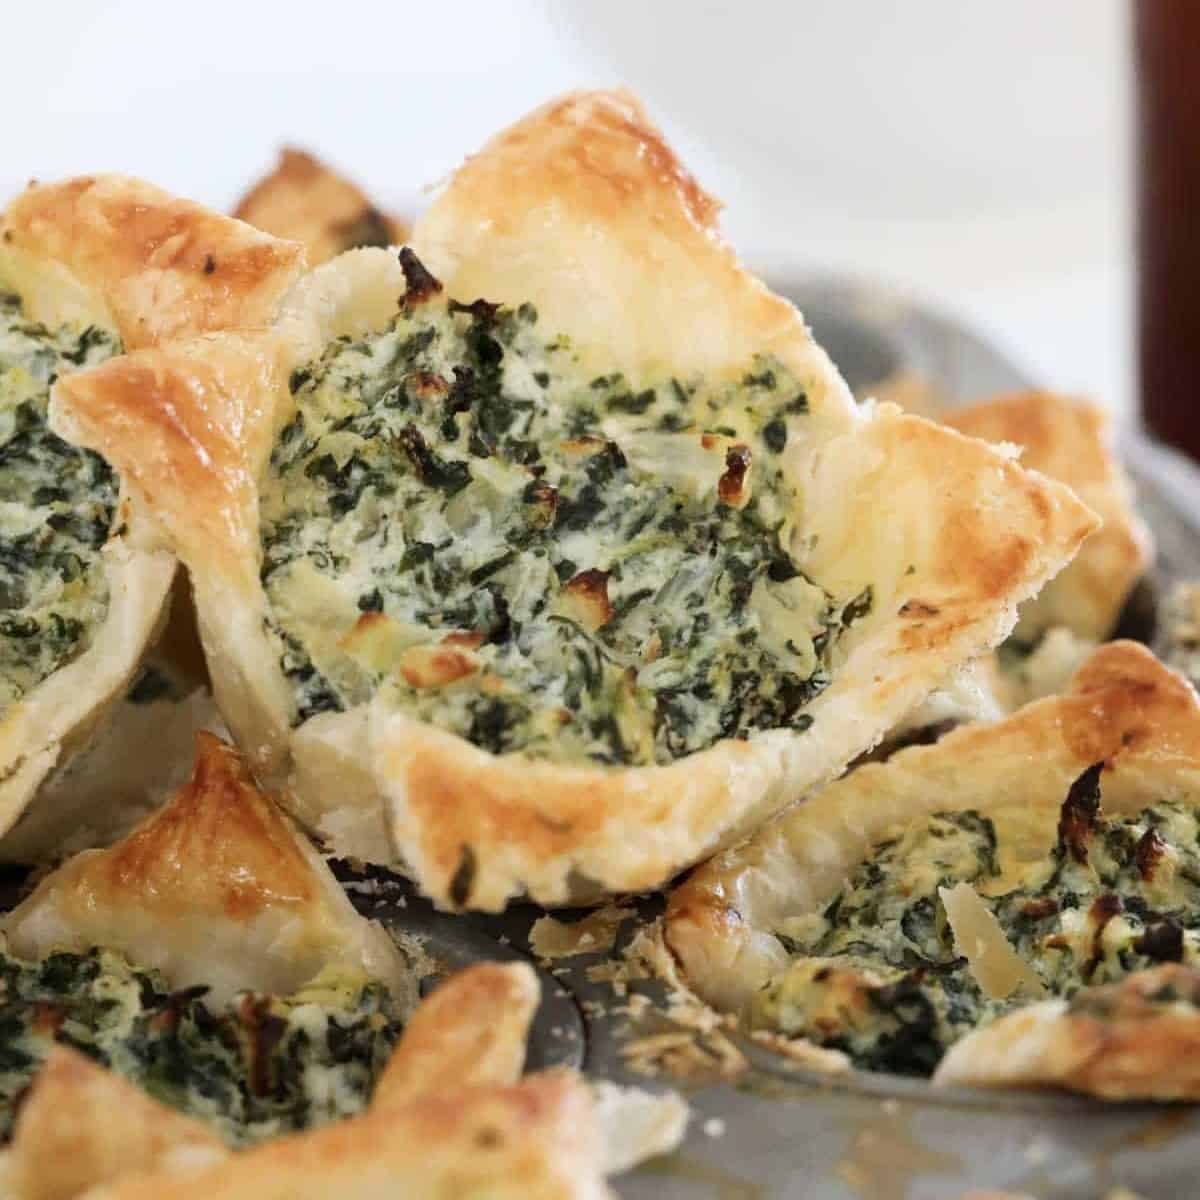 Spinach tarts with ricotta and crispy puffed pastry in a bowl.